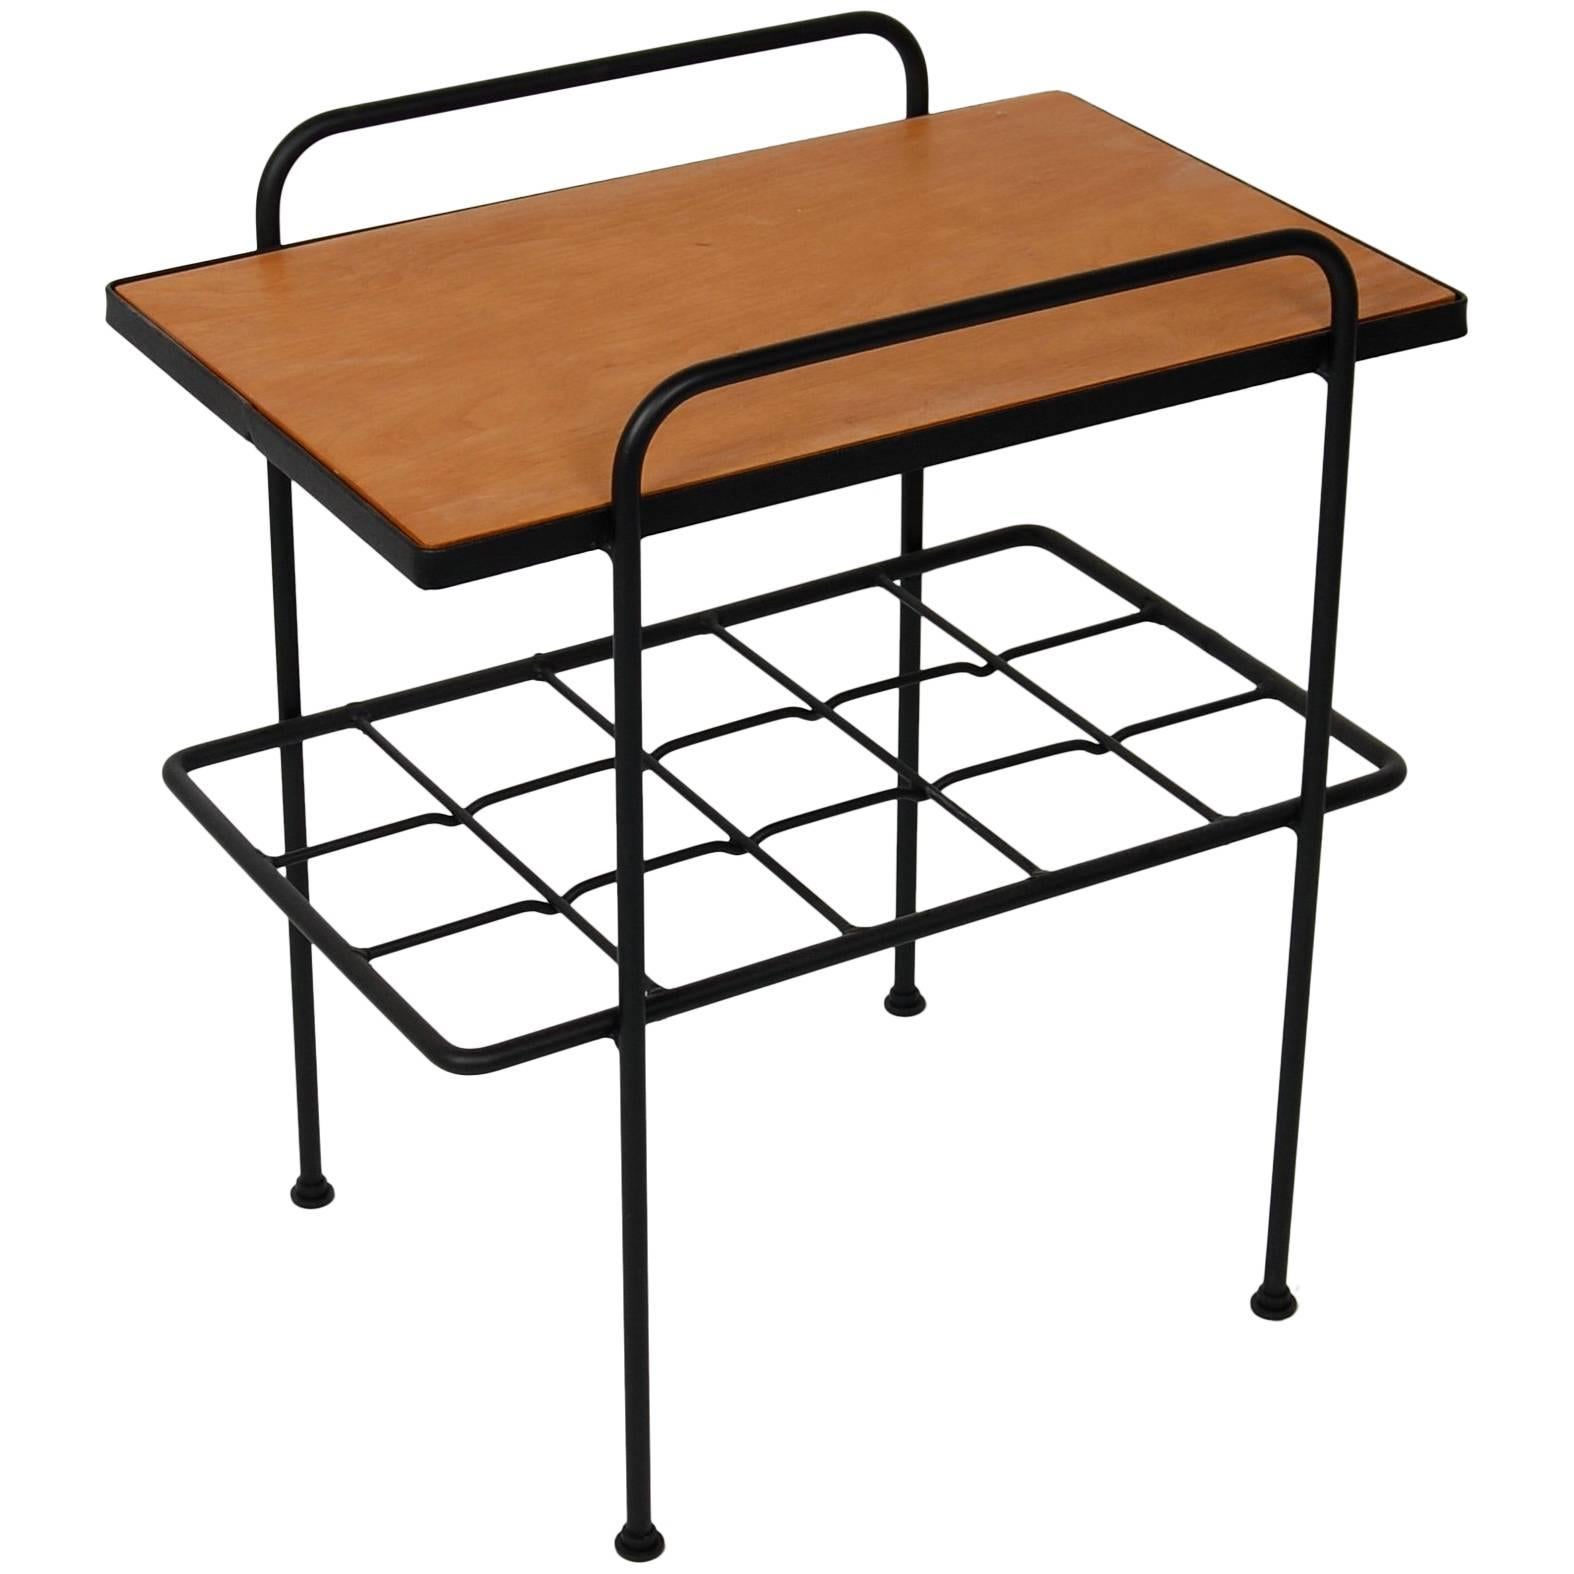 Early 1905s California Mid-Century Modern Iron and Wood End Table by Inco